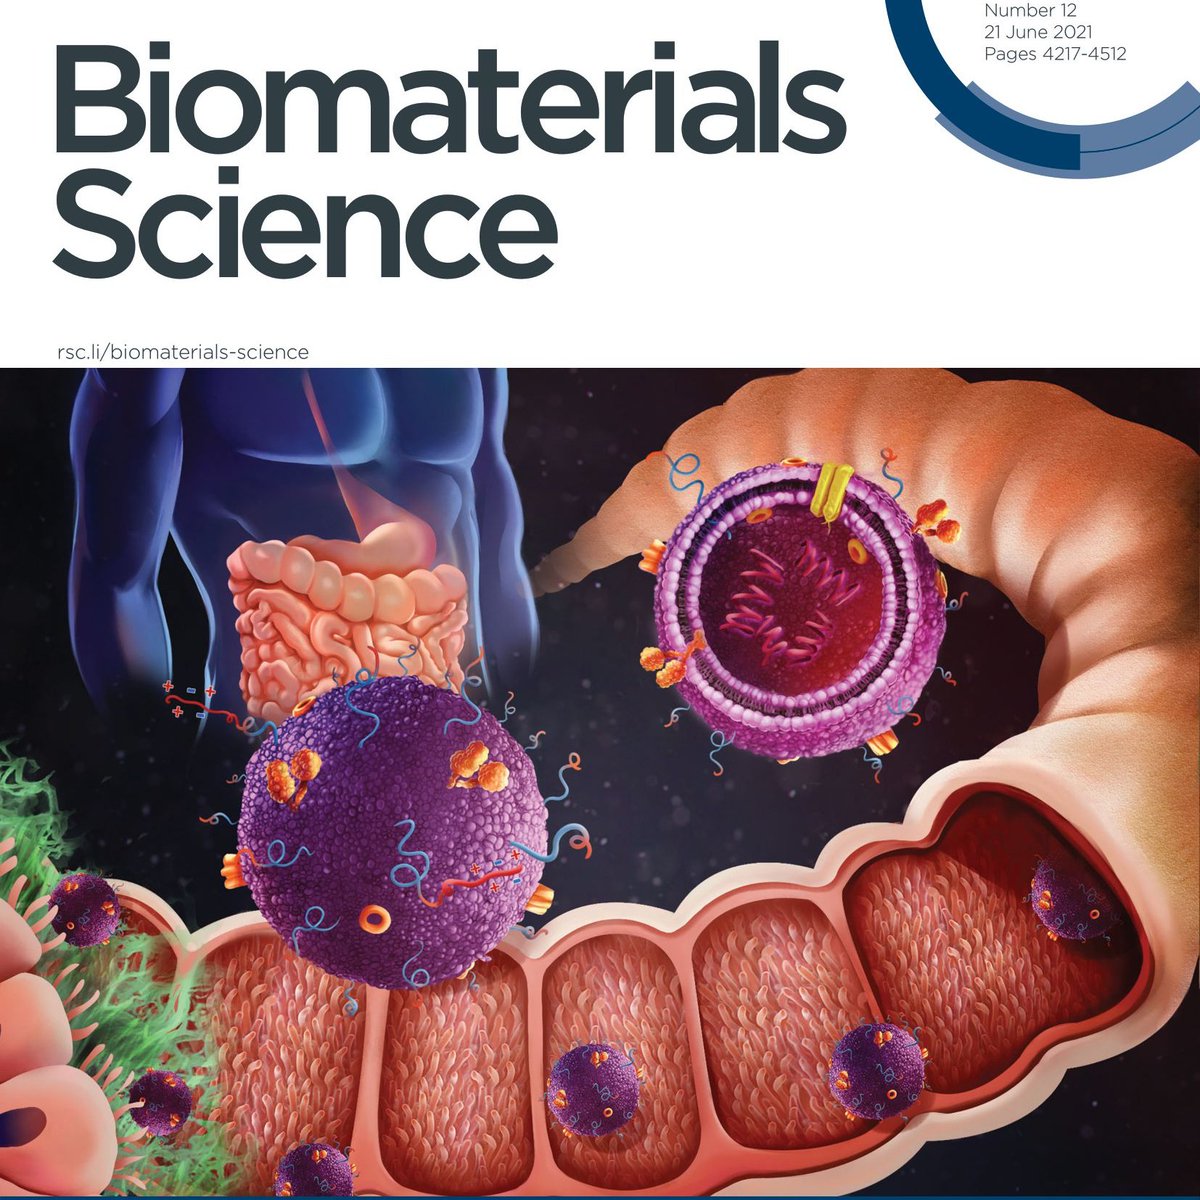 Excited to share our work on oral delivery of siRNA using milk-derived exosomes in collaboration with @sanofi featured on the inside front cover of @BioMaterSci 

@mwarren333 @ChenzhenZhang @vedadghavami 

pubs.rsc.org/en/content/art…